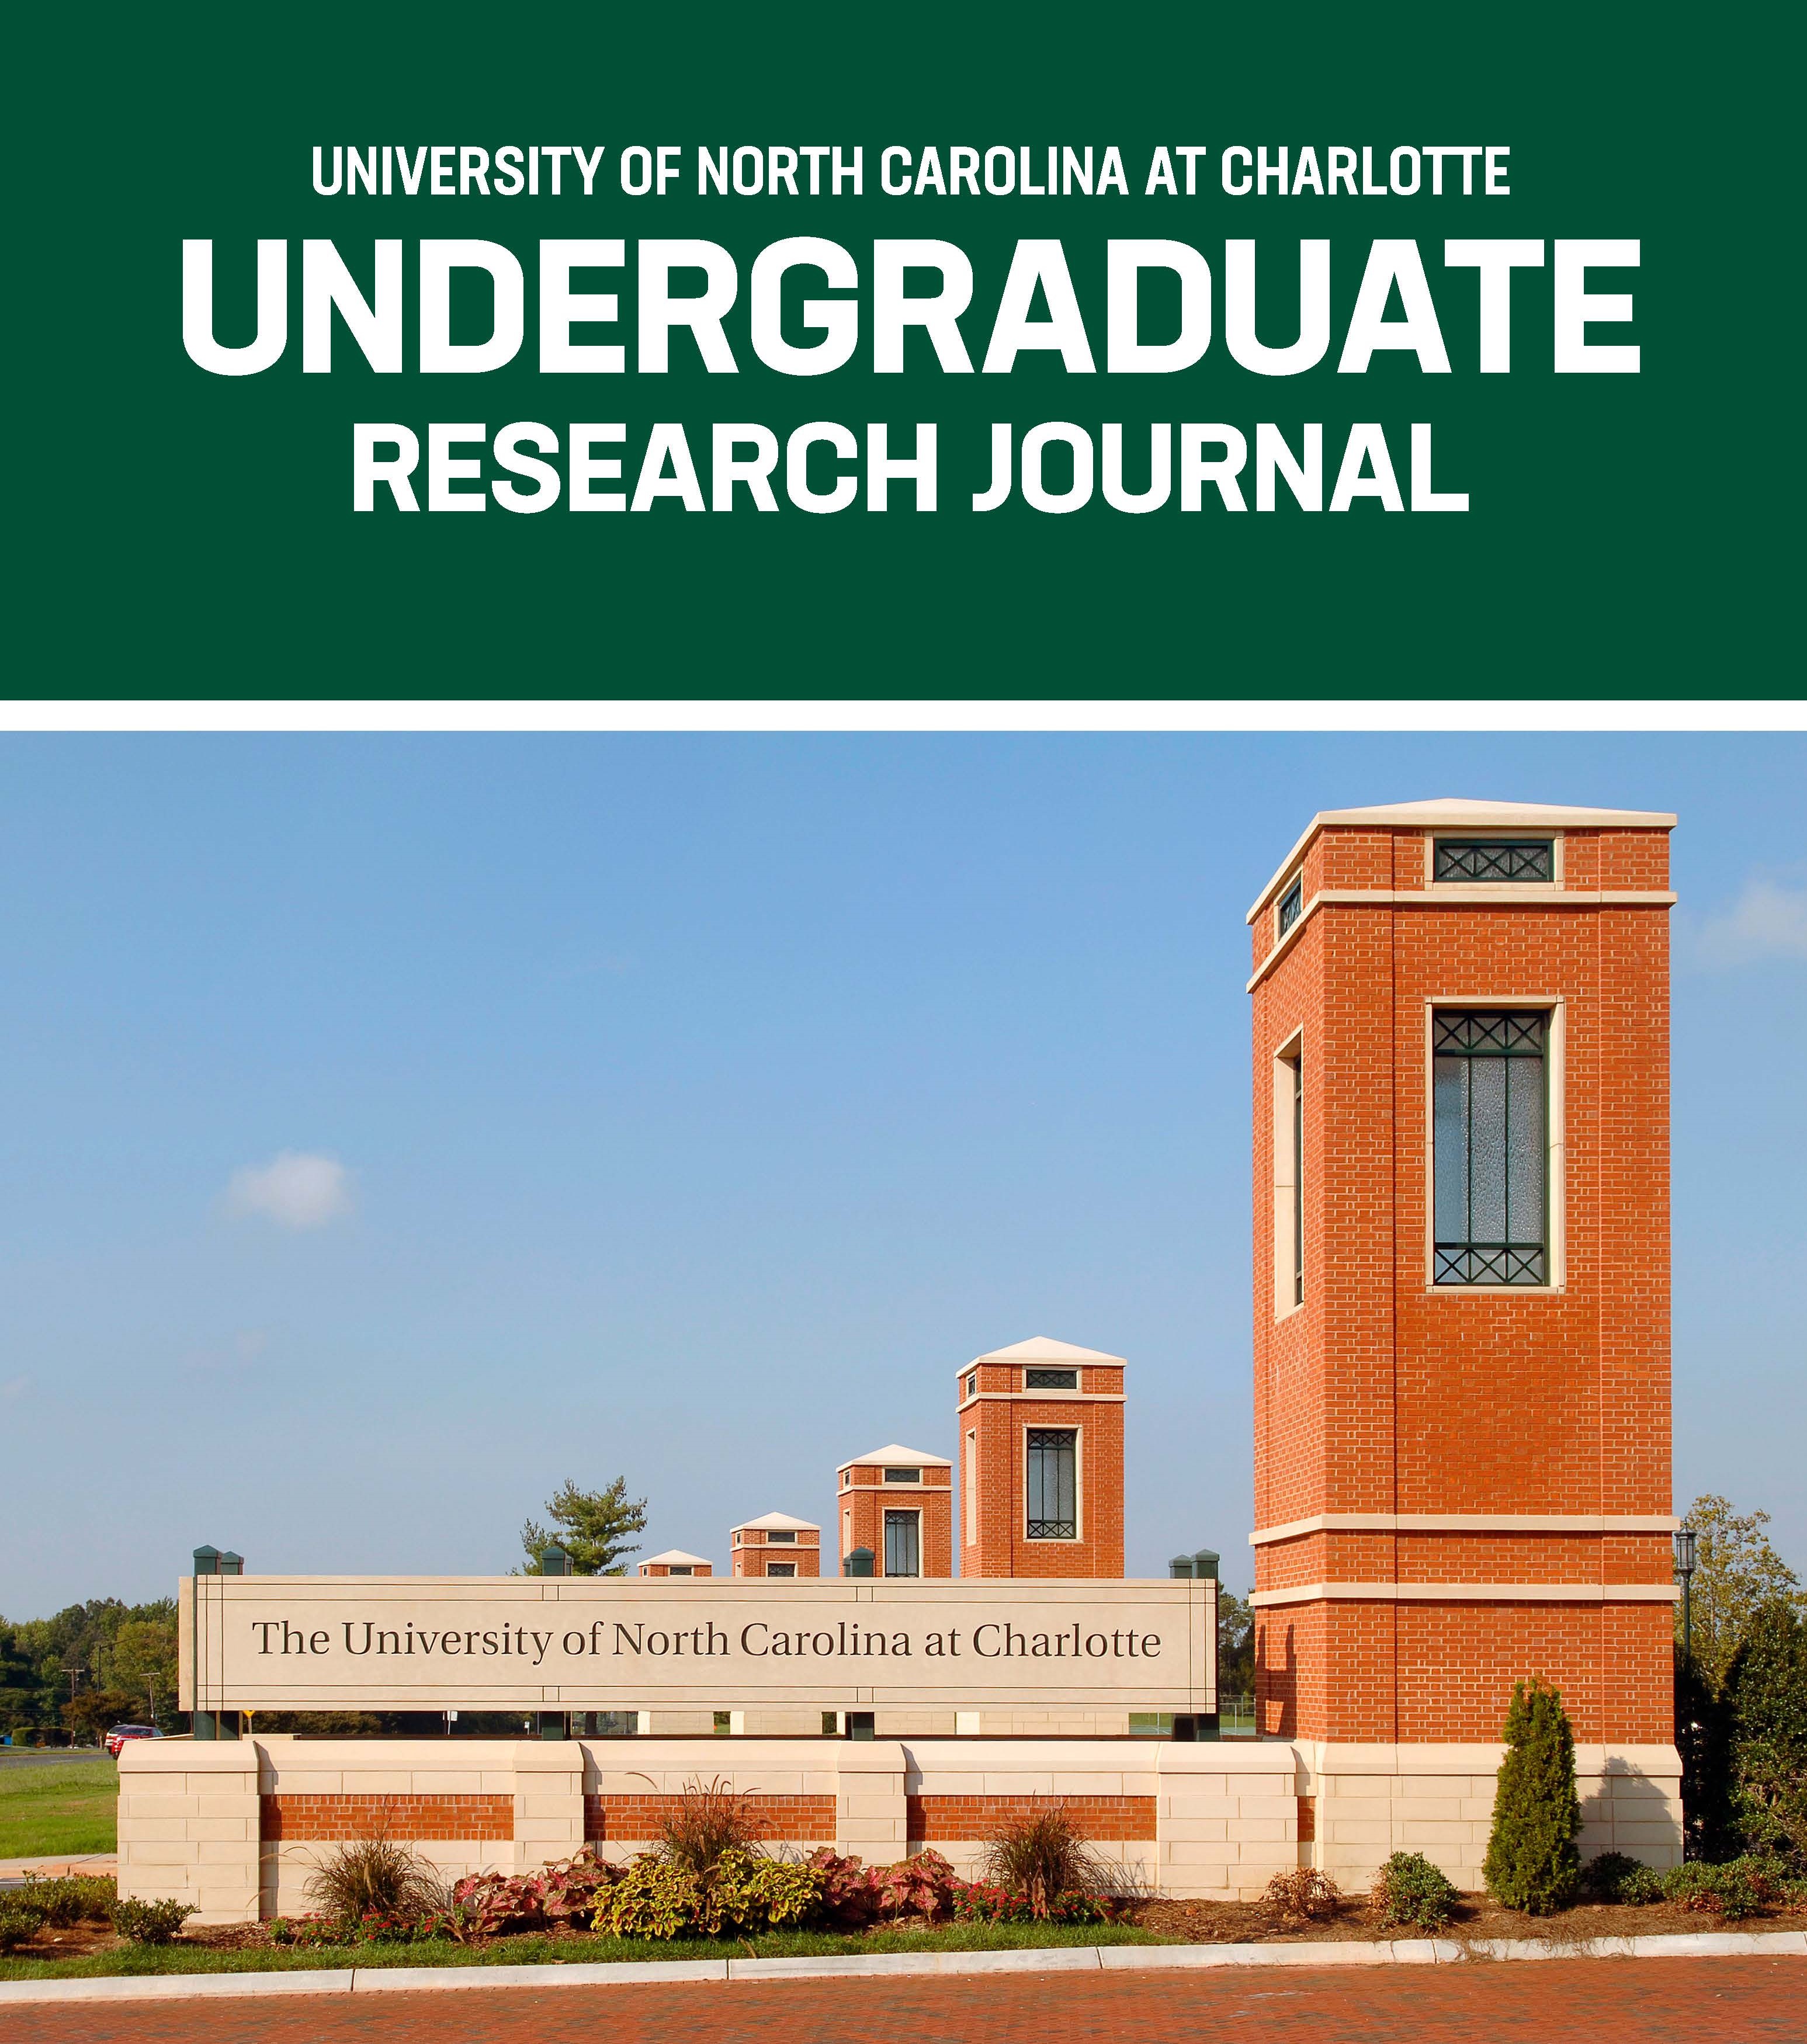 University of North Carolina at Charlotte Undergraduate Research Journal logo with a picture of the university